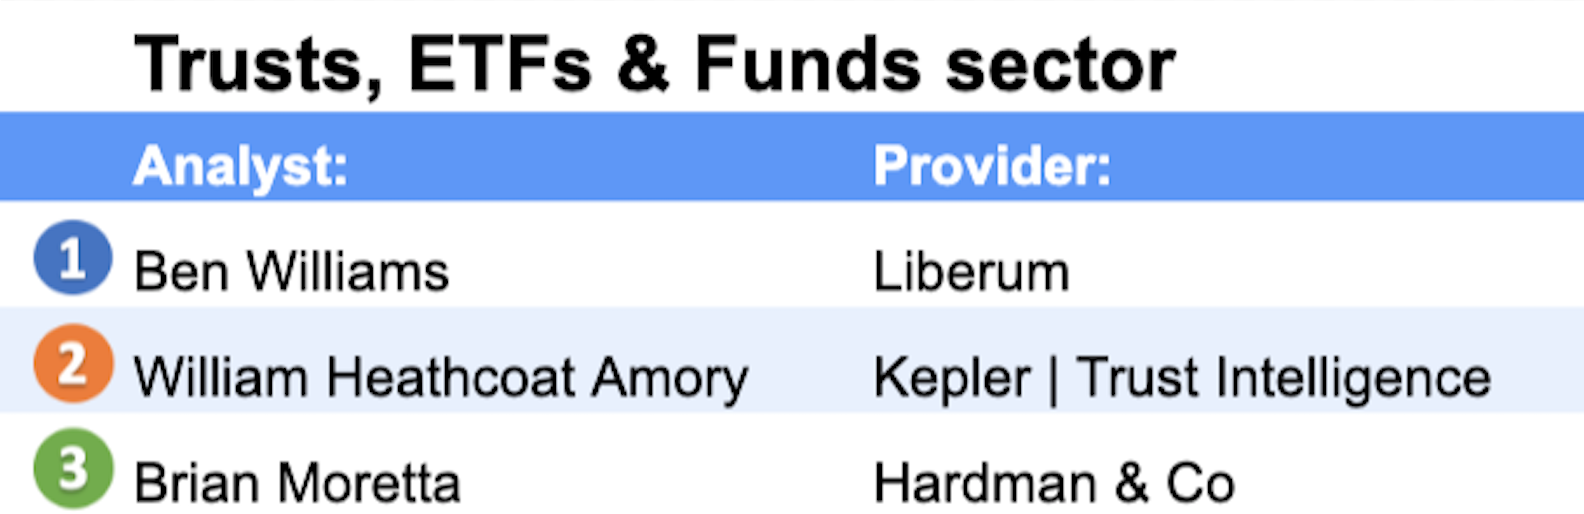 trusts etfs and funds